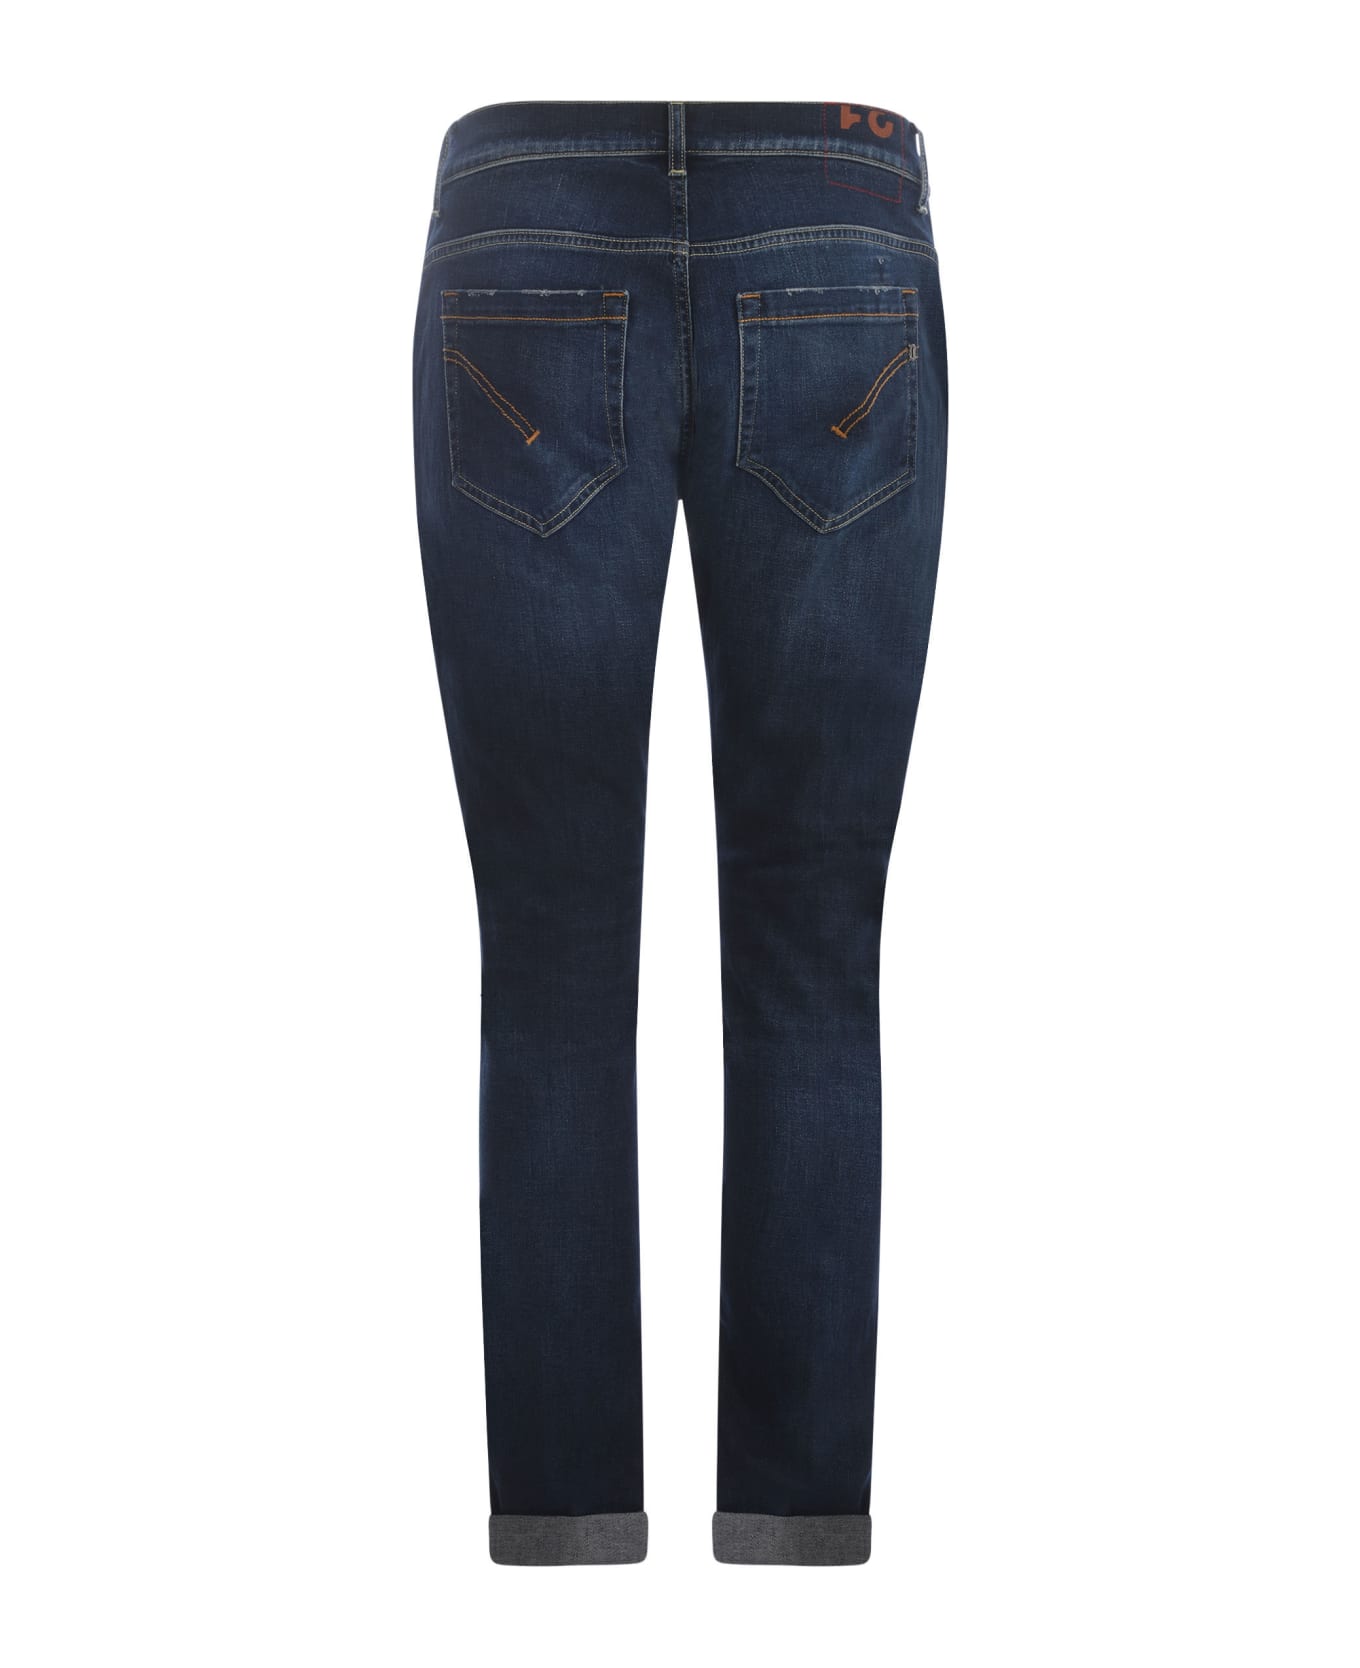 Dondup 'george' Jeans - BLUE ボトムス